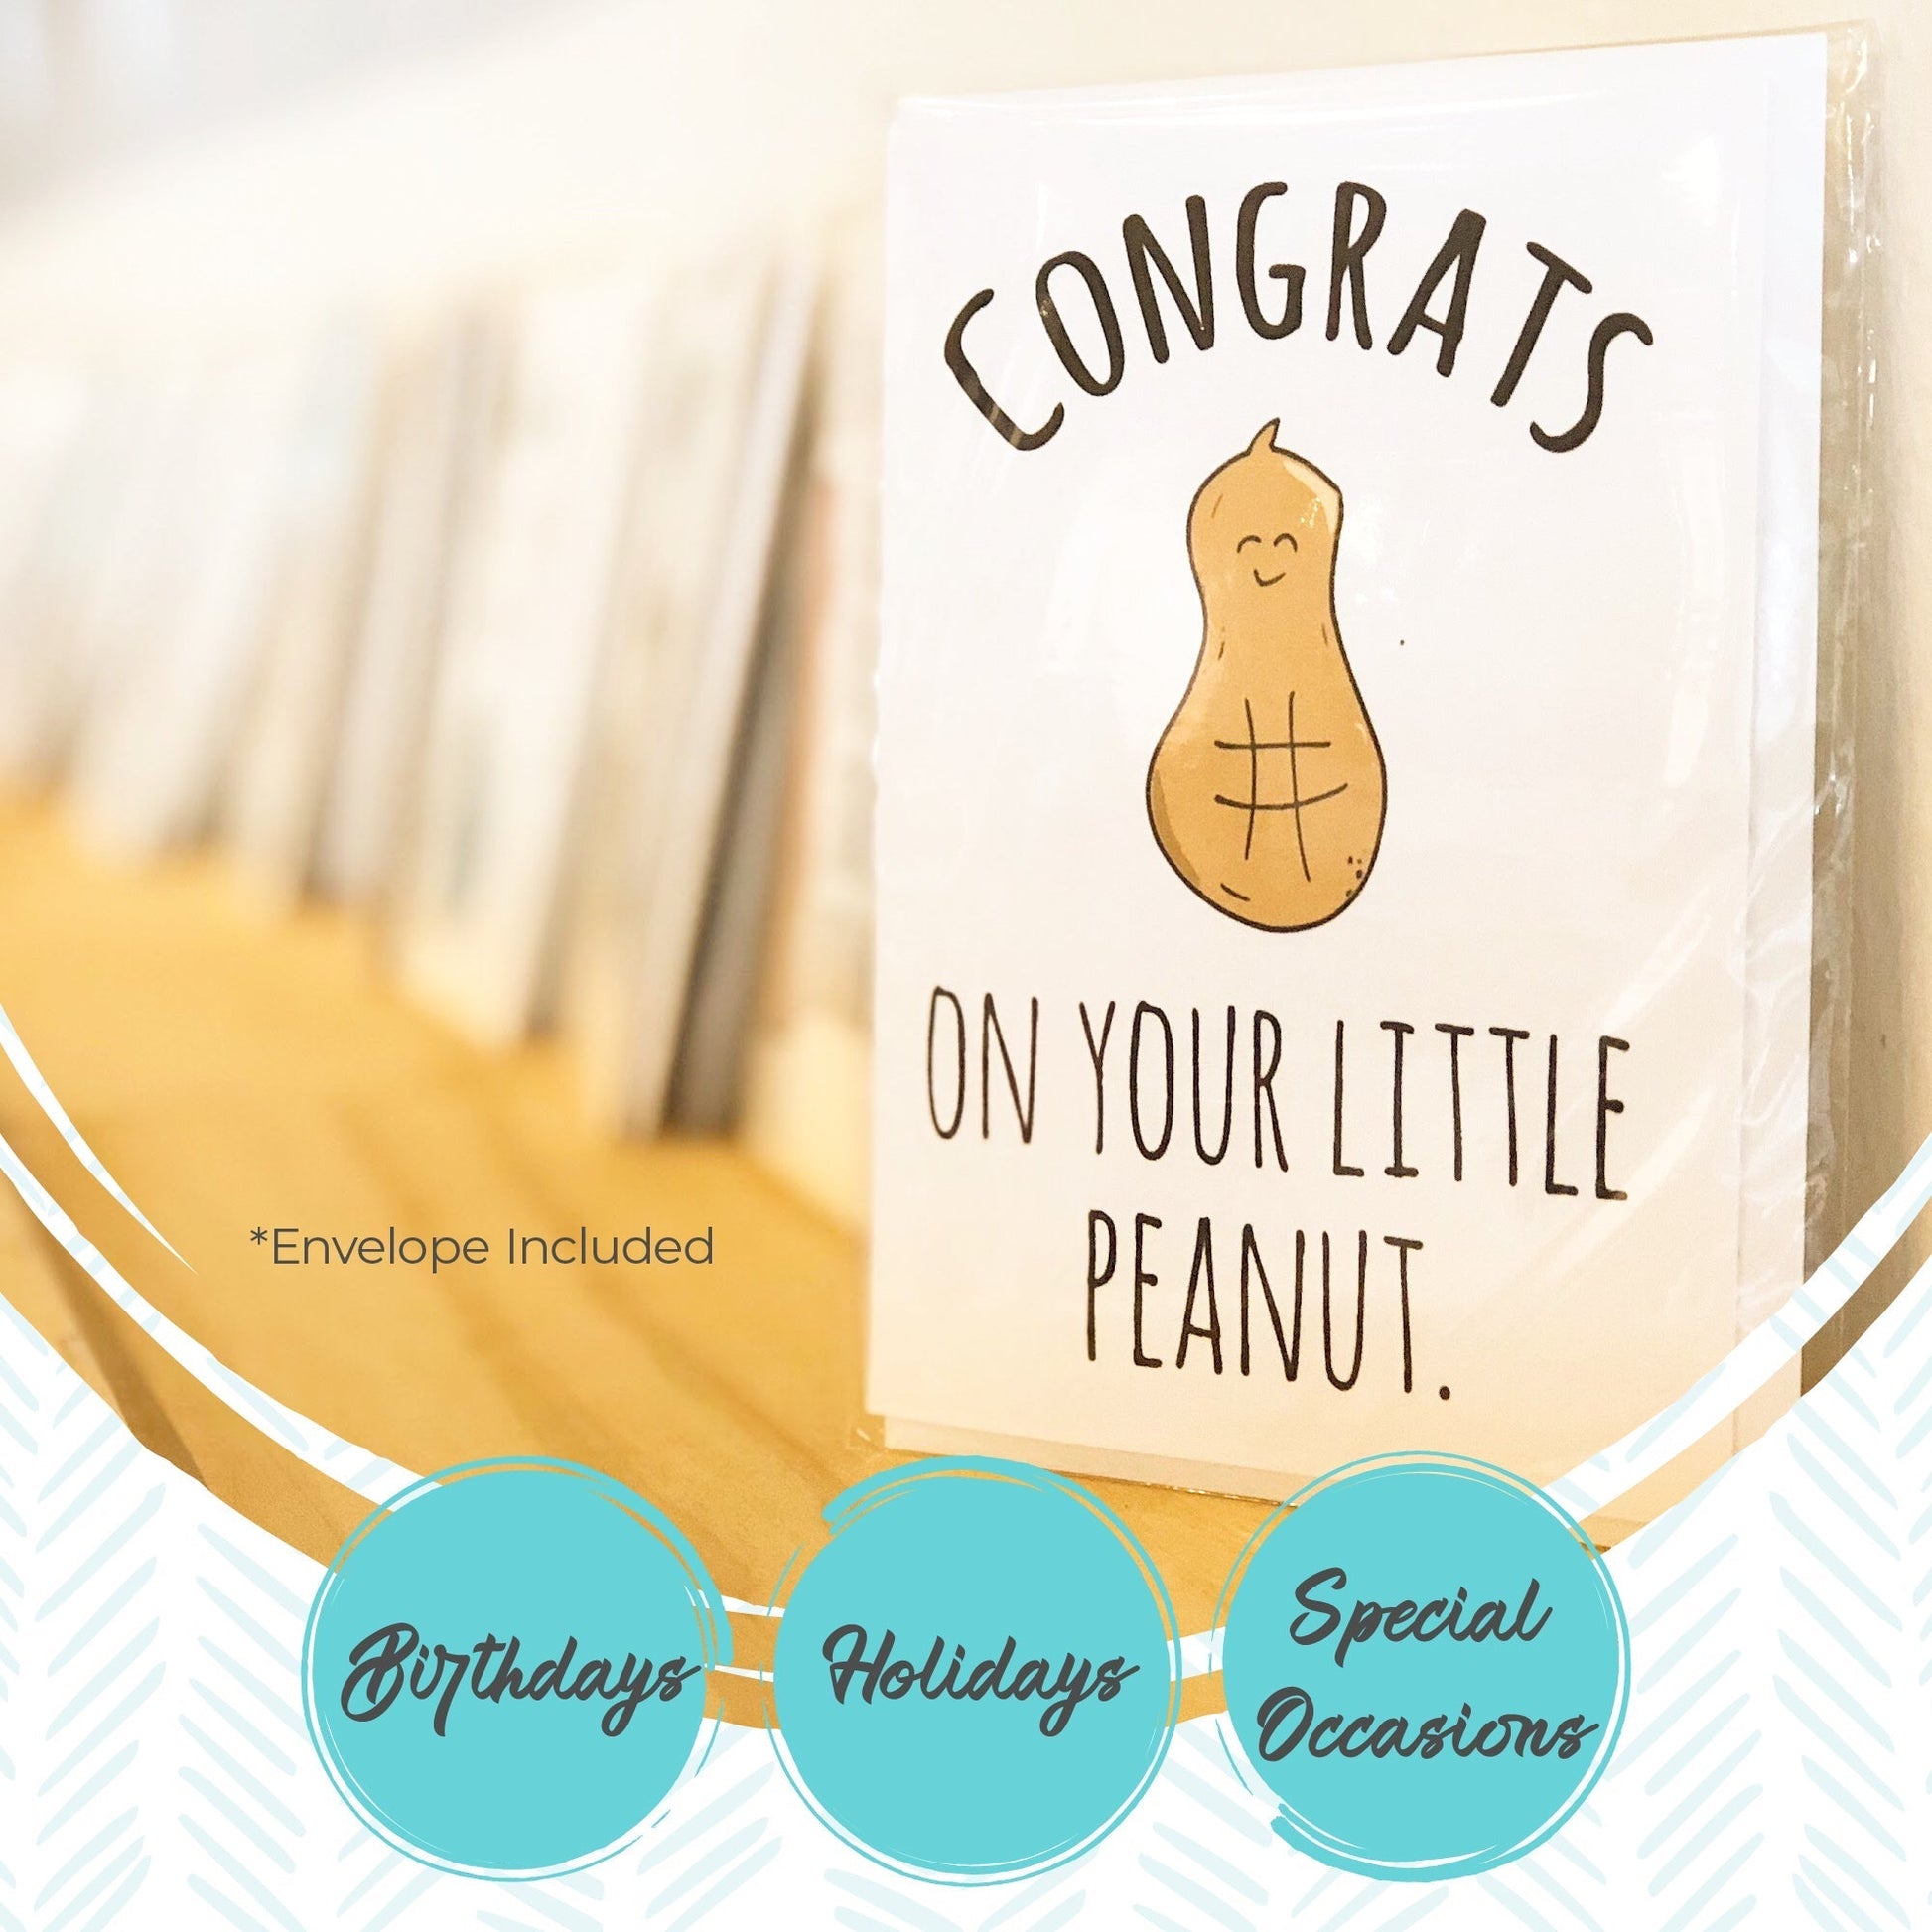 Congrats On That Really Great Thing You Did! - Greeting Card - MoonlightMakers